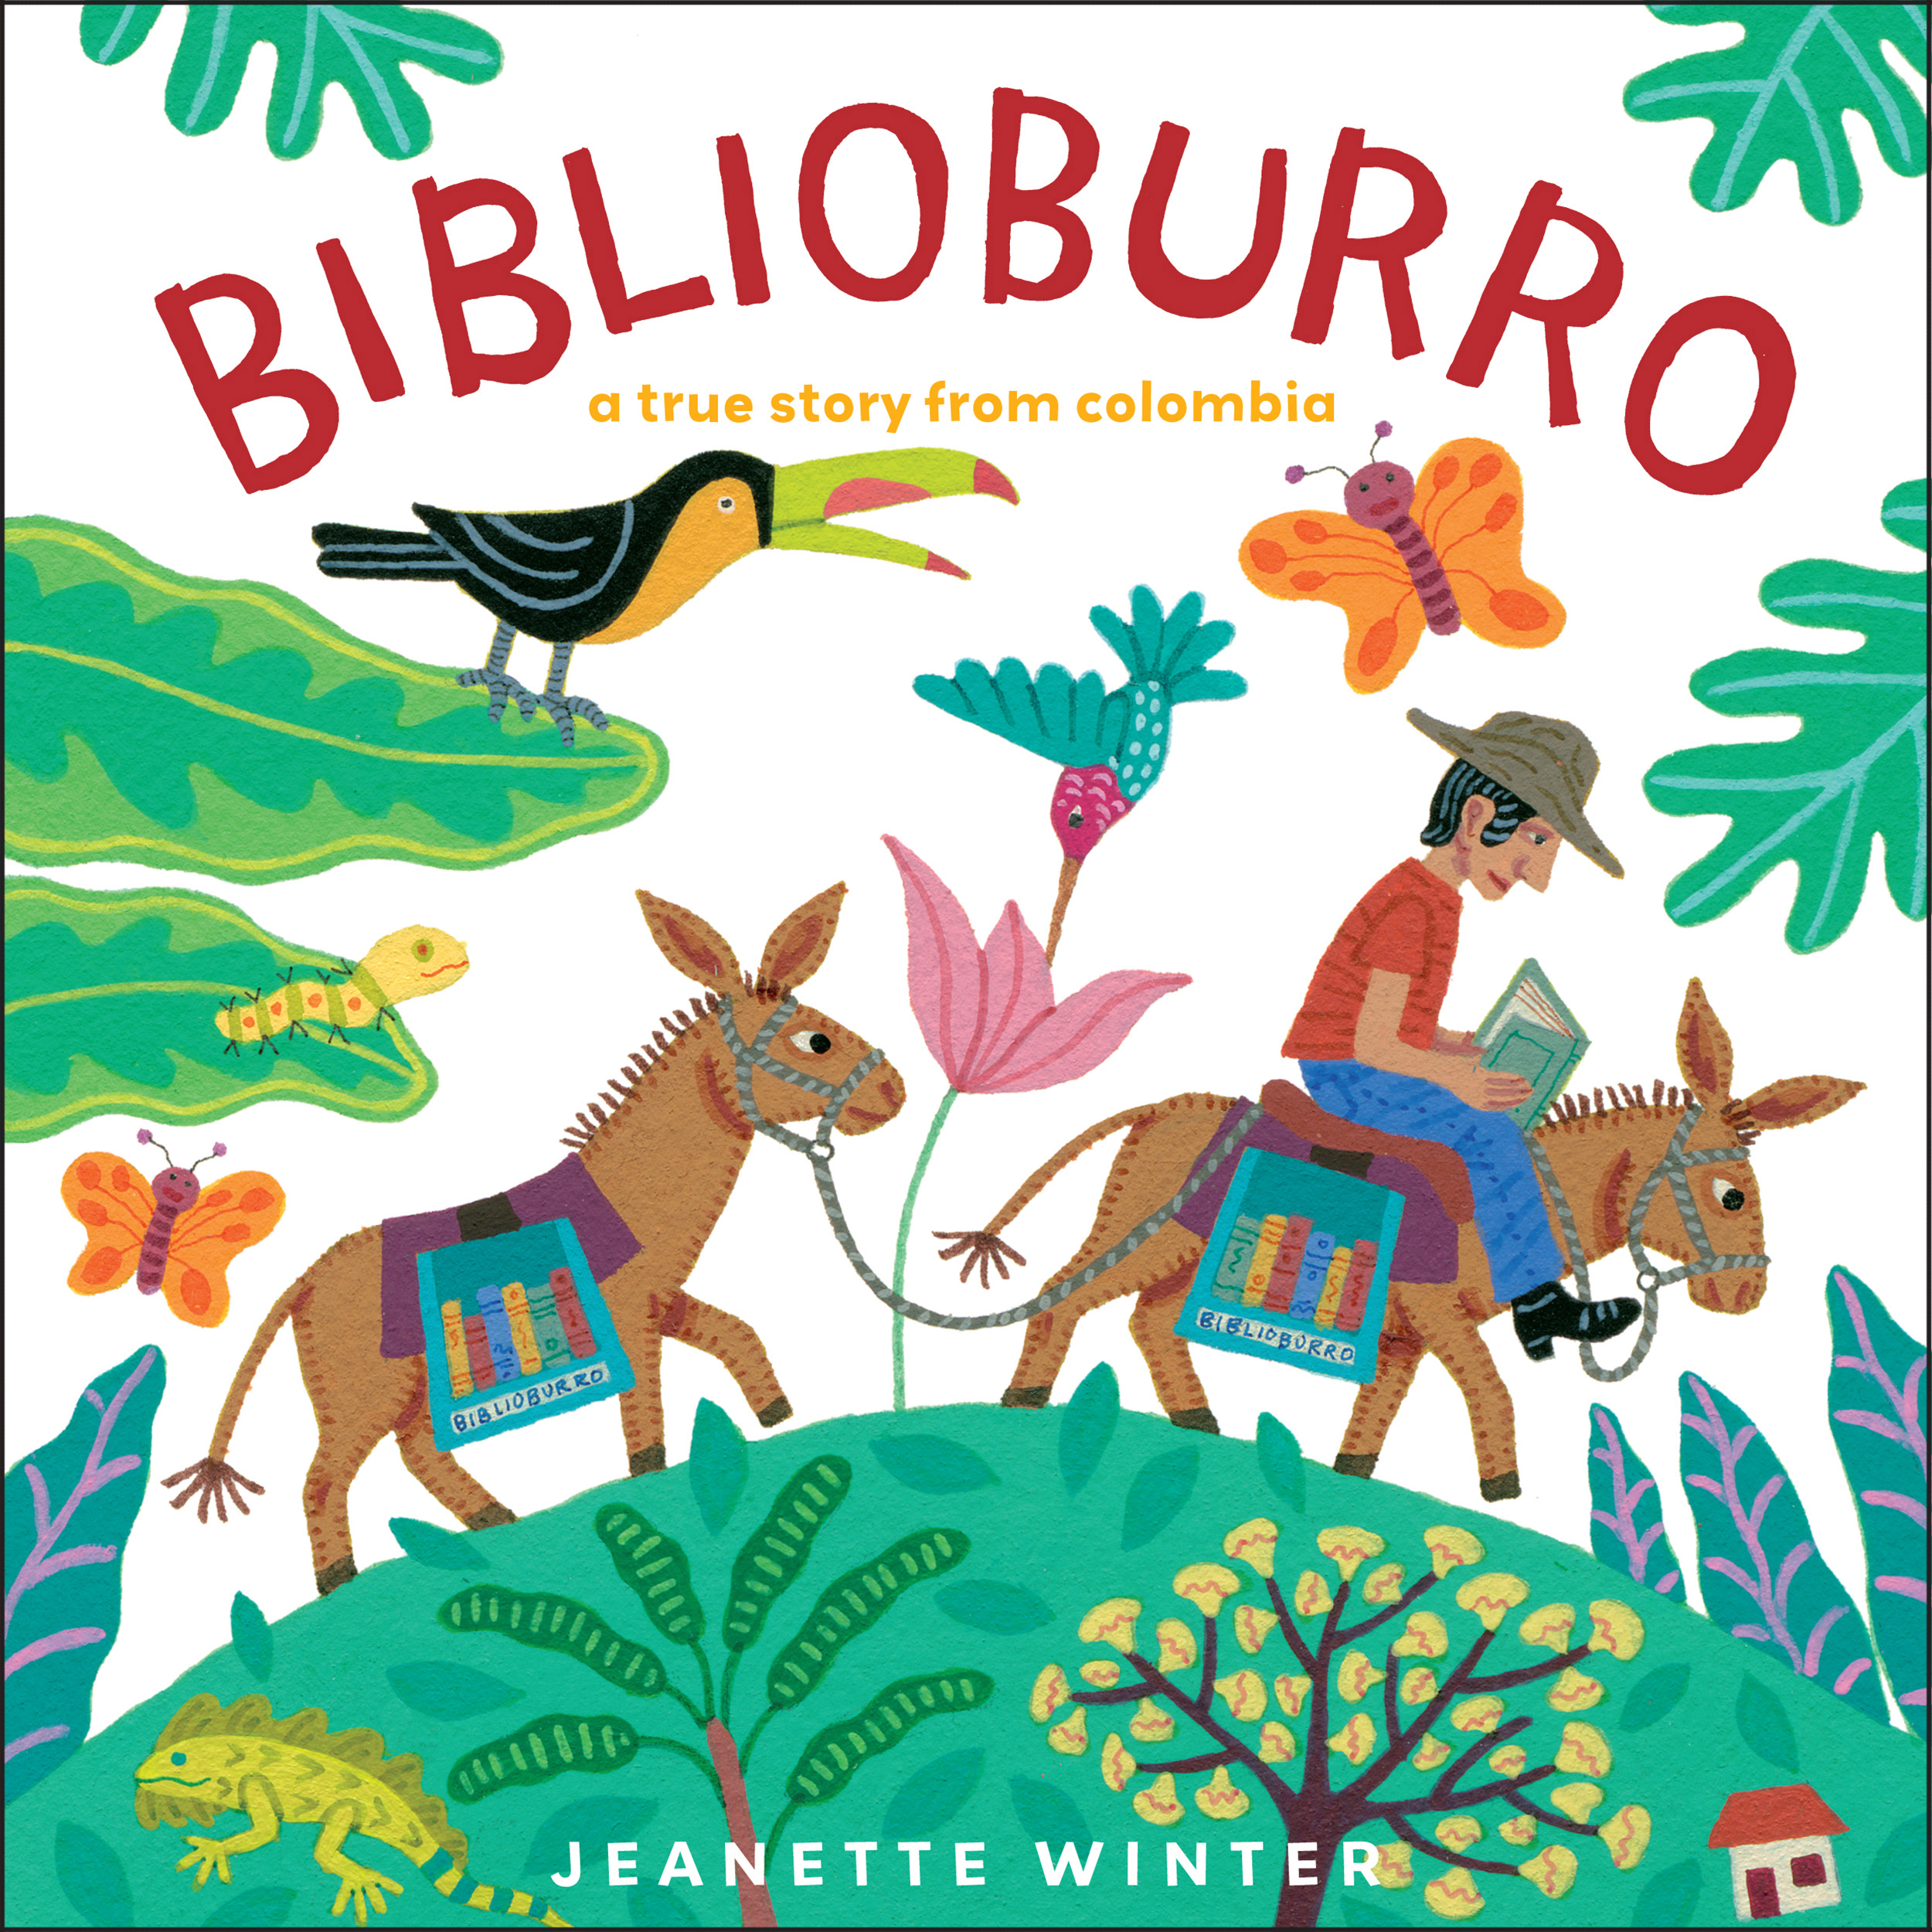 Book cover for "Biblioburro: A True Story from Colombia" depicting a man riding a donkey and leading another donkey